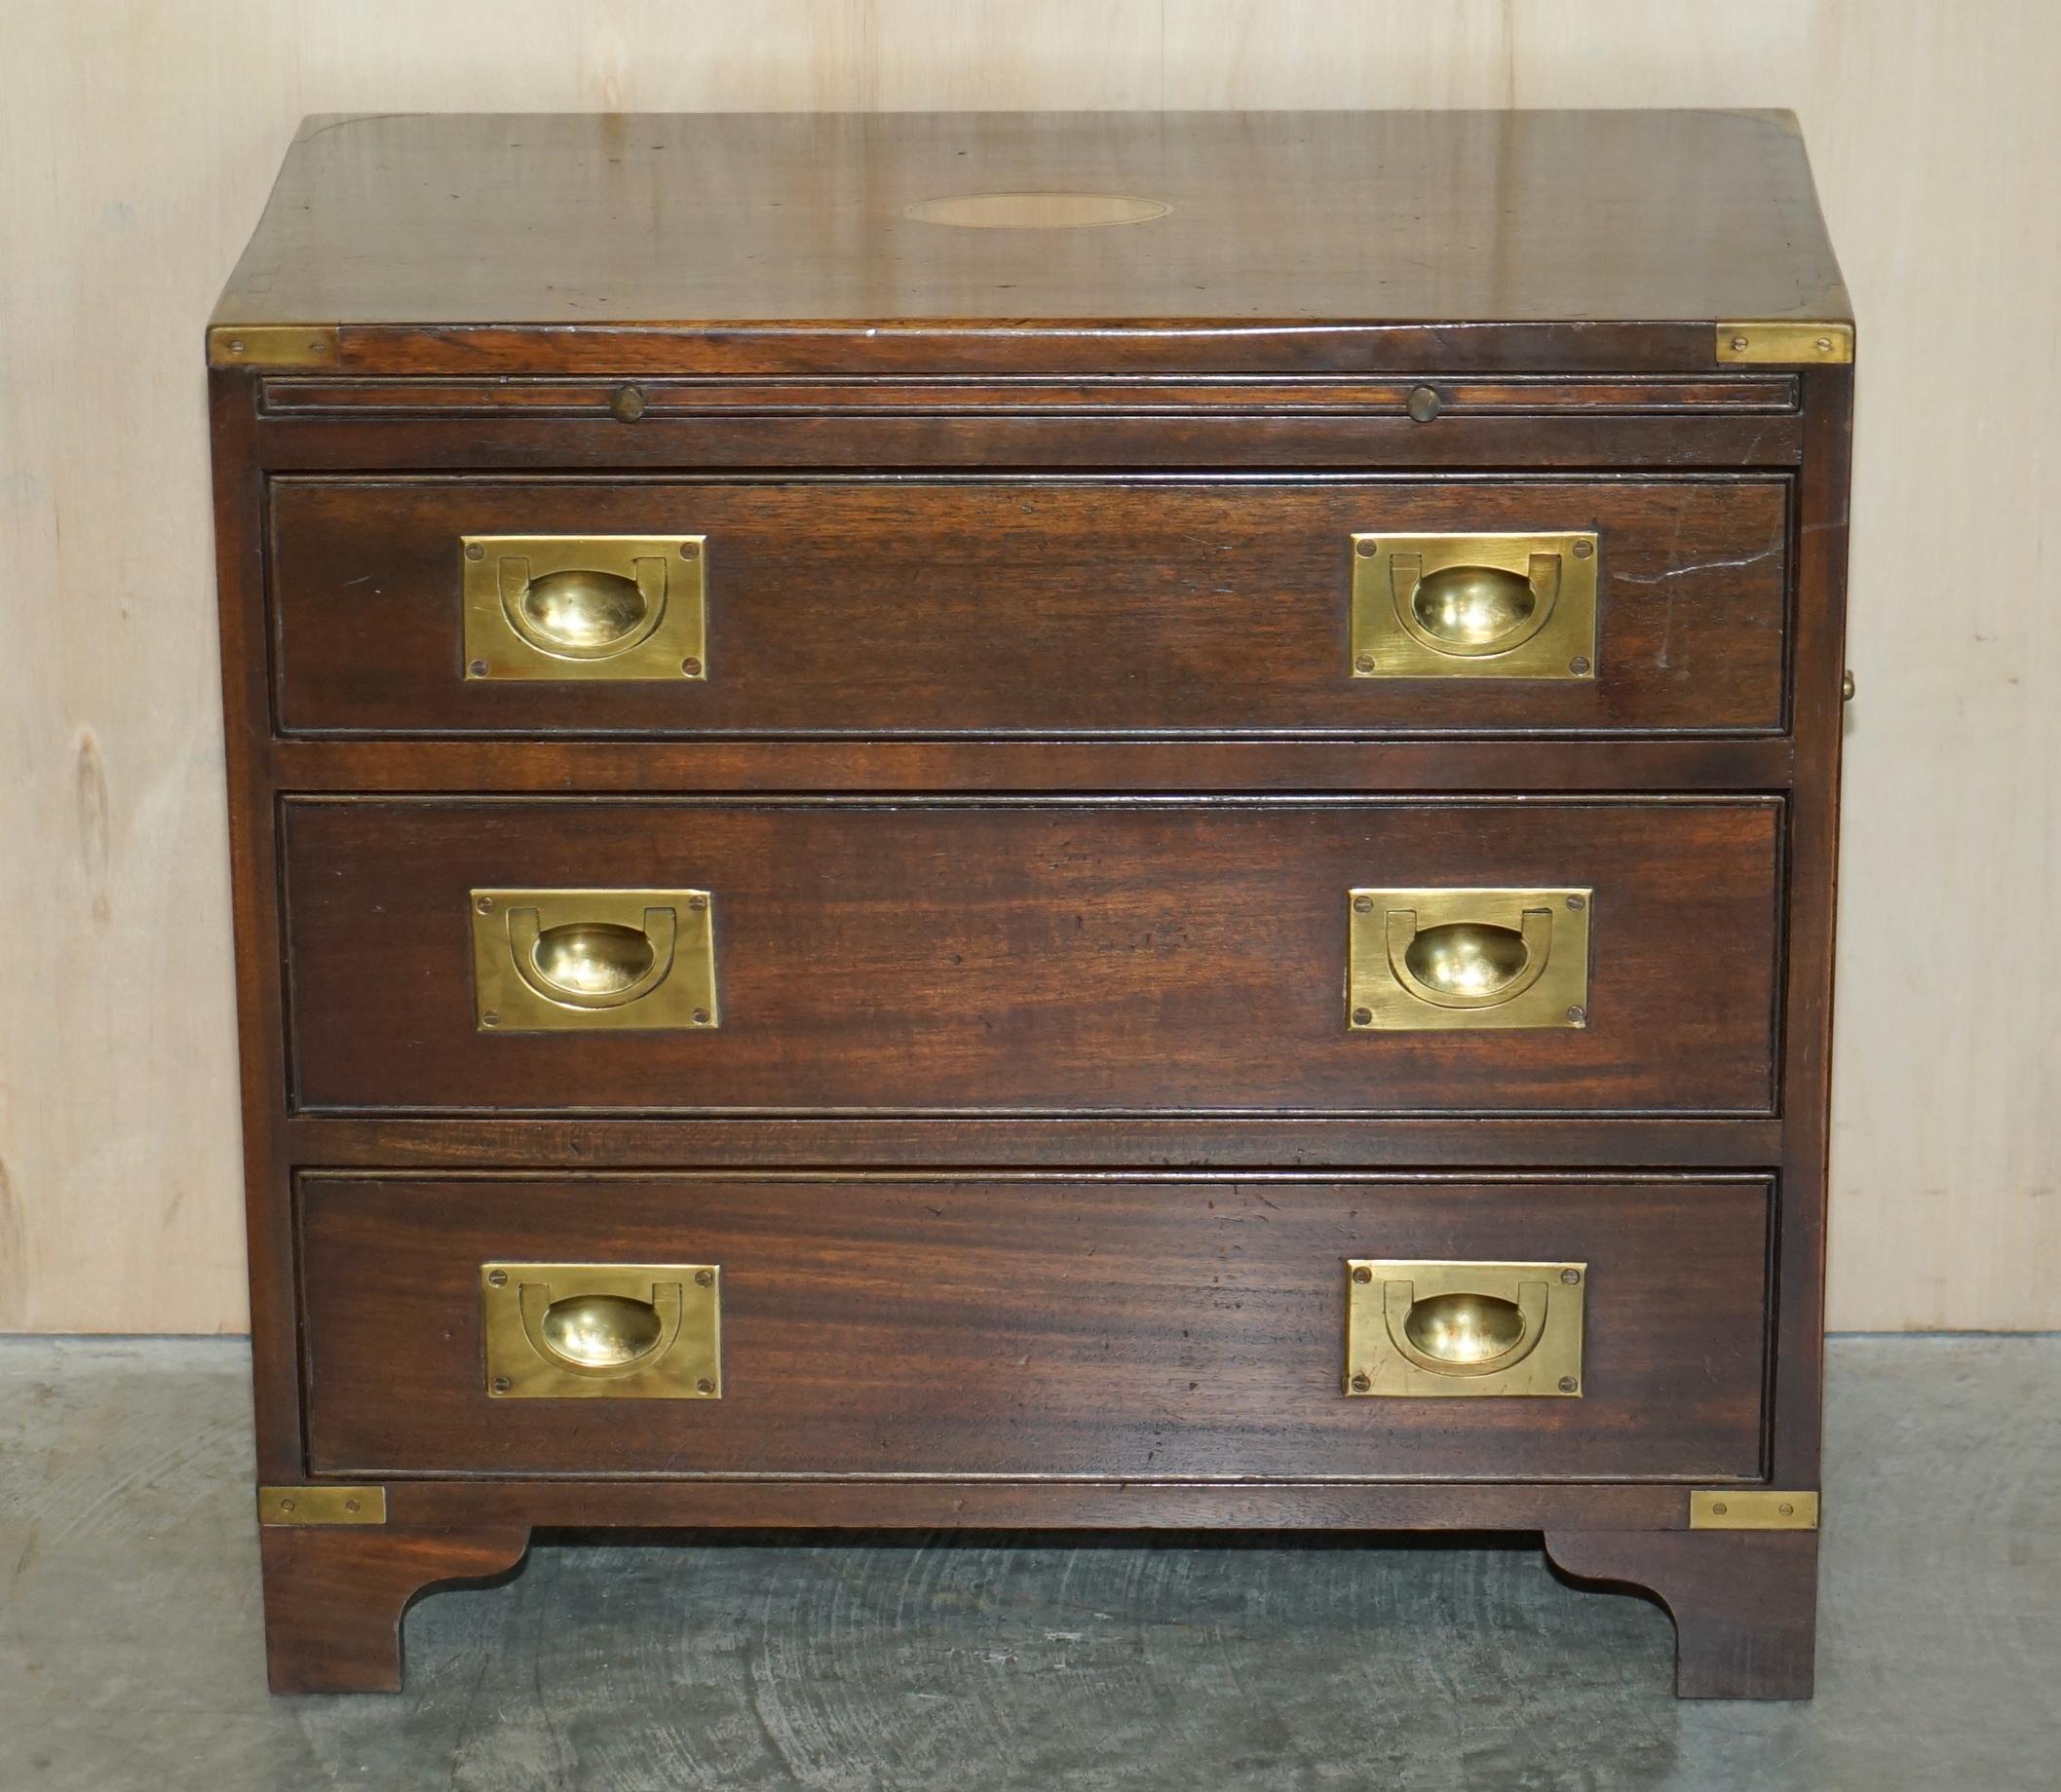 We are delighted to offer for sale this sublime vintage Harrods Kennedy Military Campaign Bachelors chest with butlers serving tray

A truly stunning and well made piece by Kennedy Furniture and retailed through Harrods London, this is a bachelor